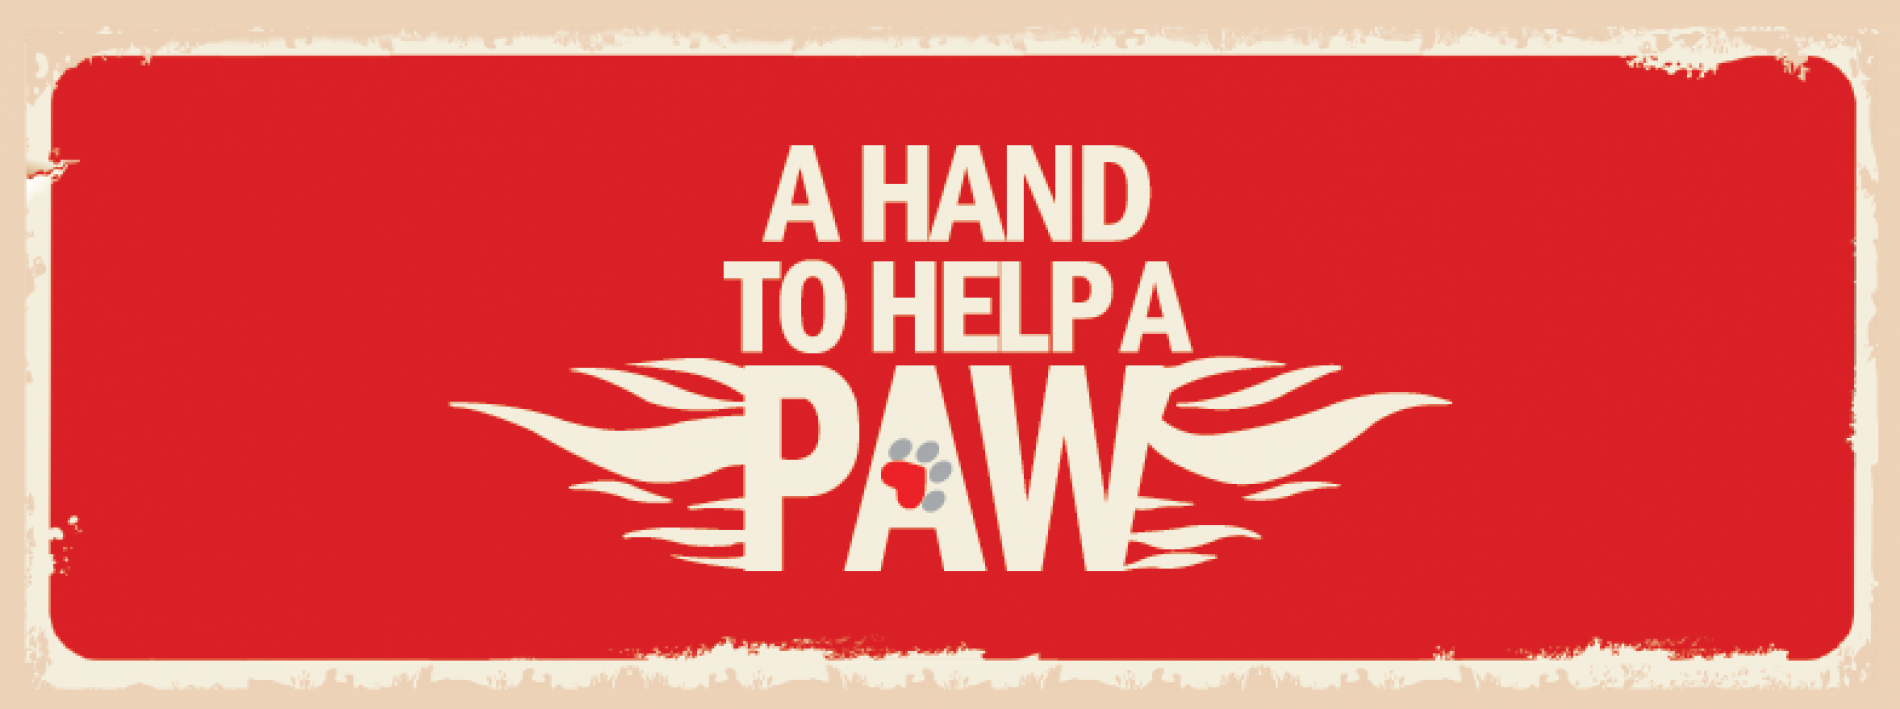 A Hand To Help A Paw (Fundraiser)